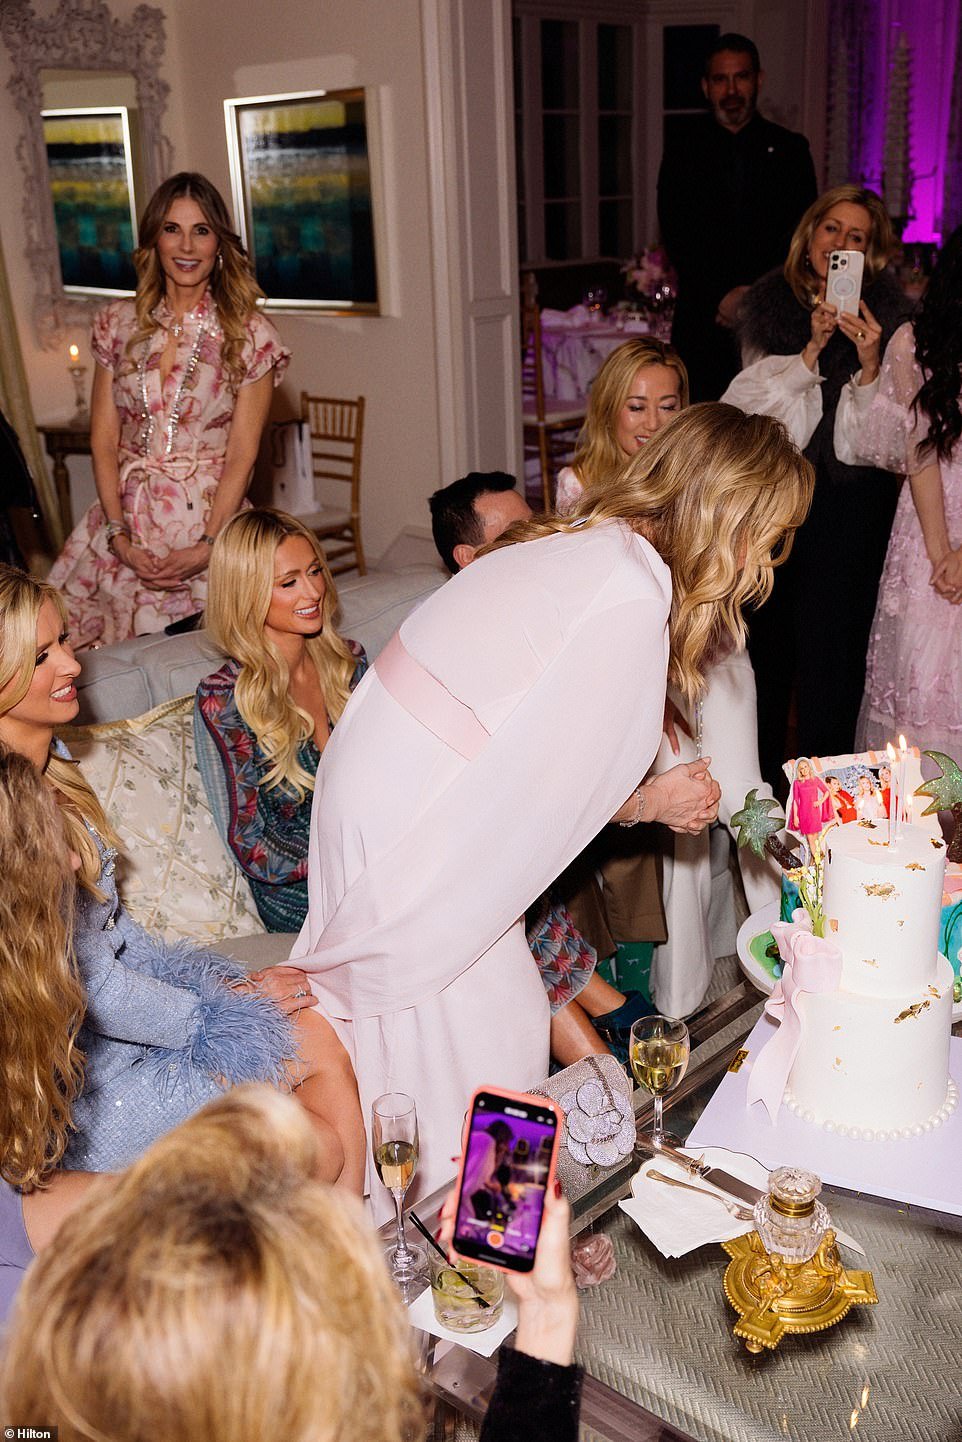 The reality TV icon looked at her birthday cake with a photo of her in pink and an image with her girls